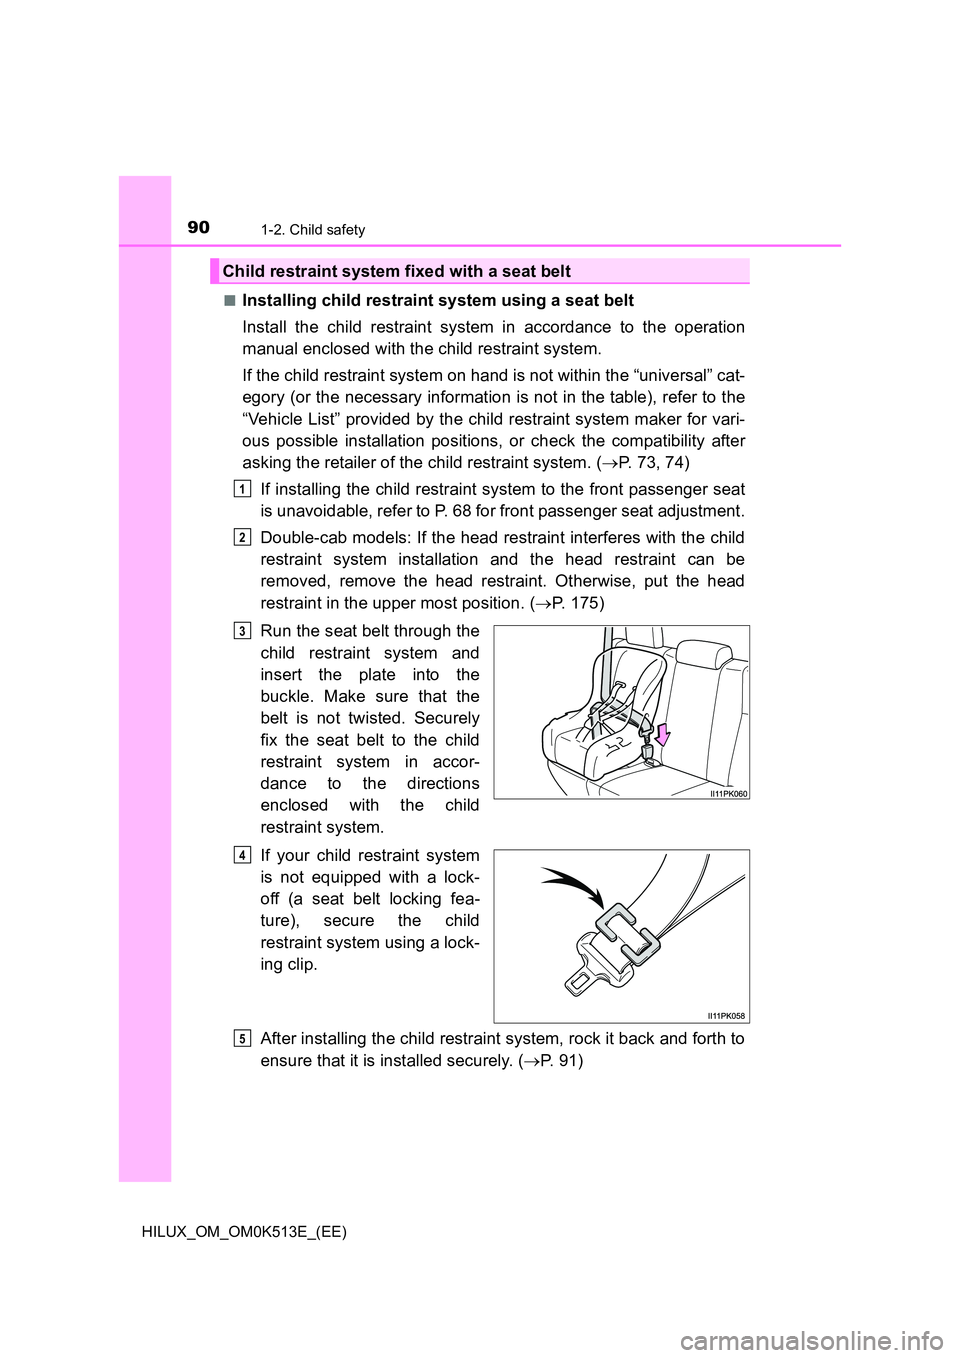 TOYOTA HILUX 2021  Owners Manual (in English) 901-2. Child safety
HILUX_OM_OM0K513E_(EE) 
�QInstalling child restraint system using a seat belt 
Install the child restraint system in accordance to the operation 
manual enclosed with the child res